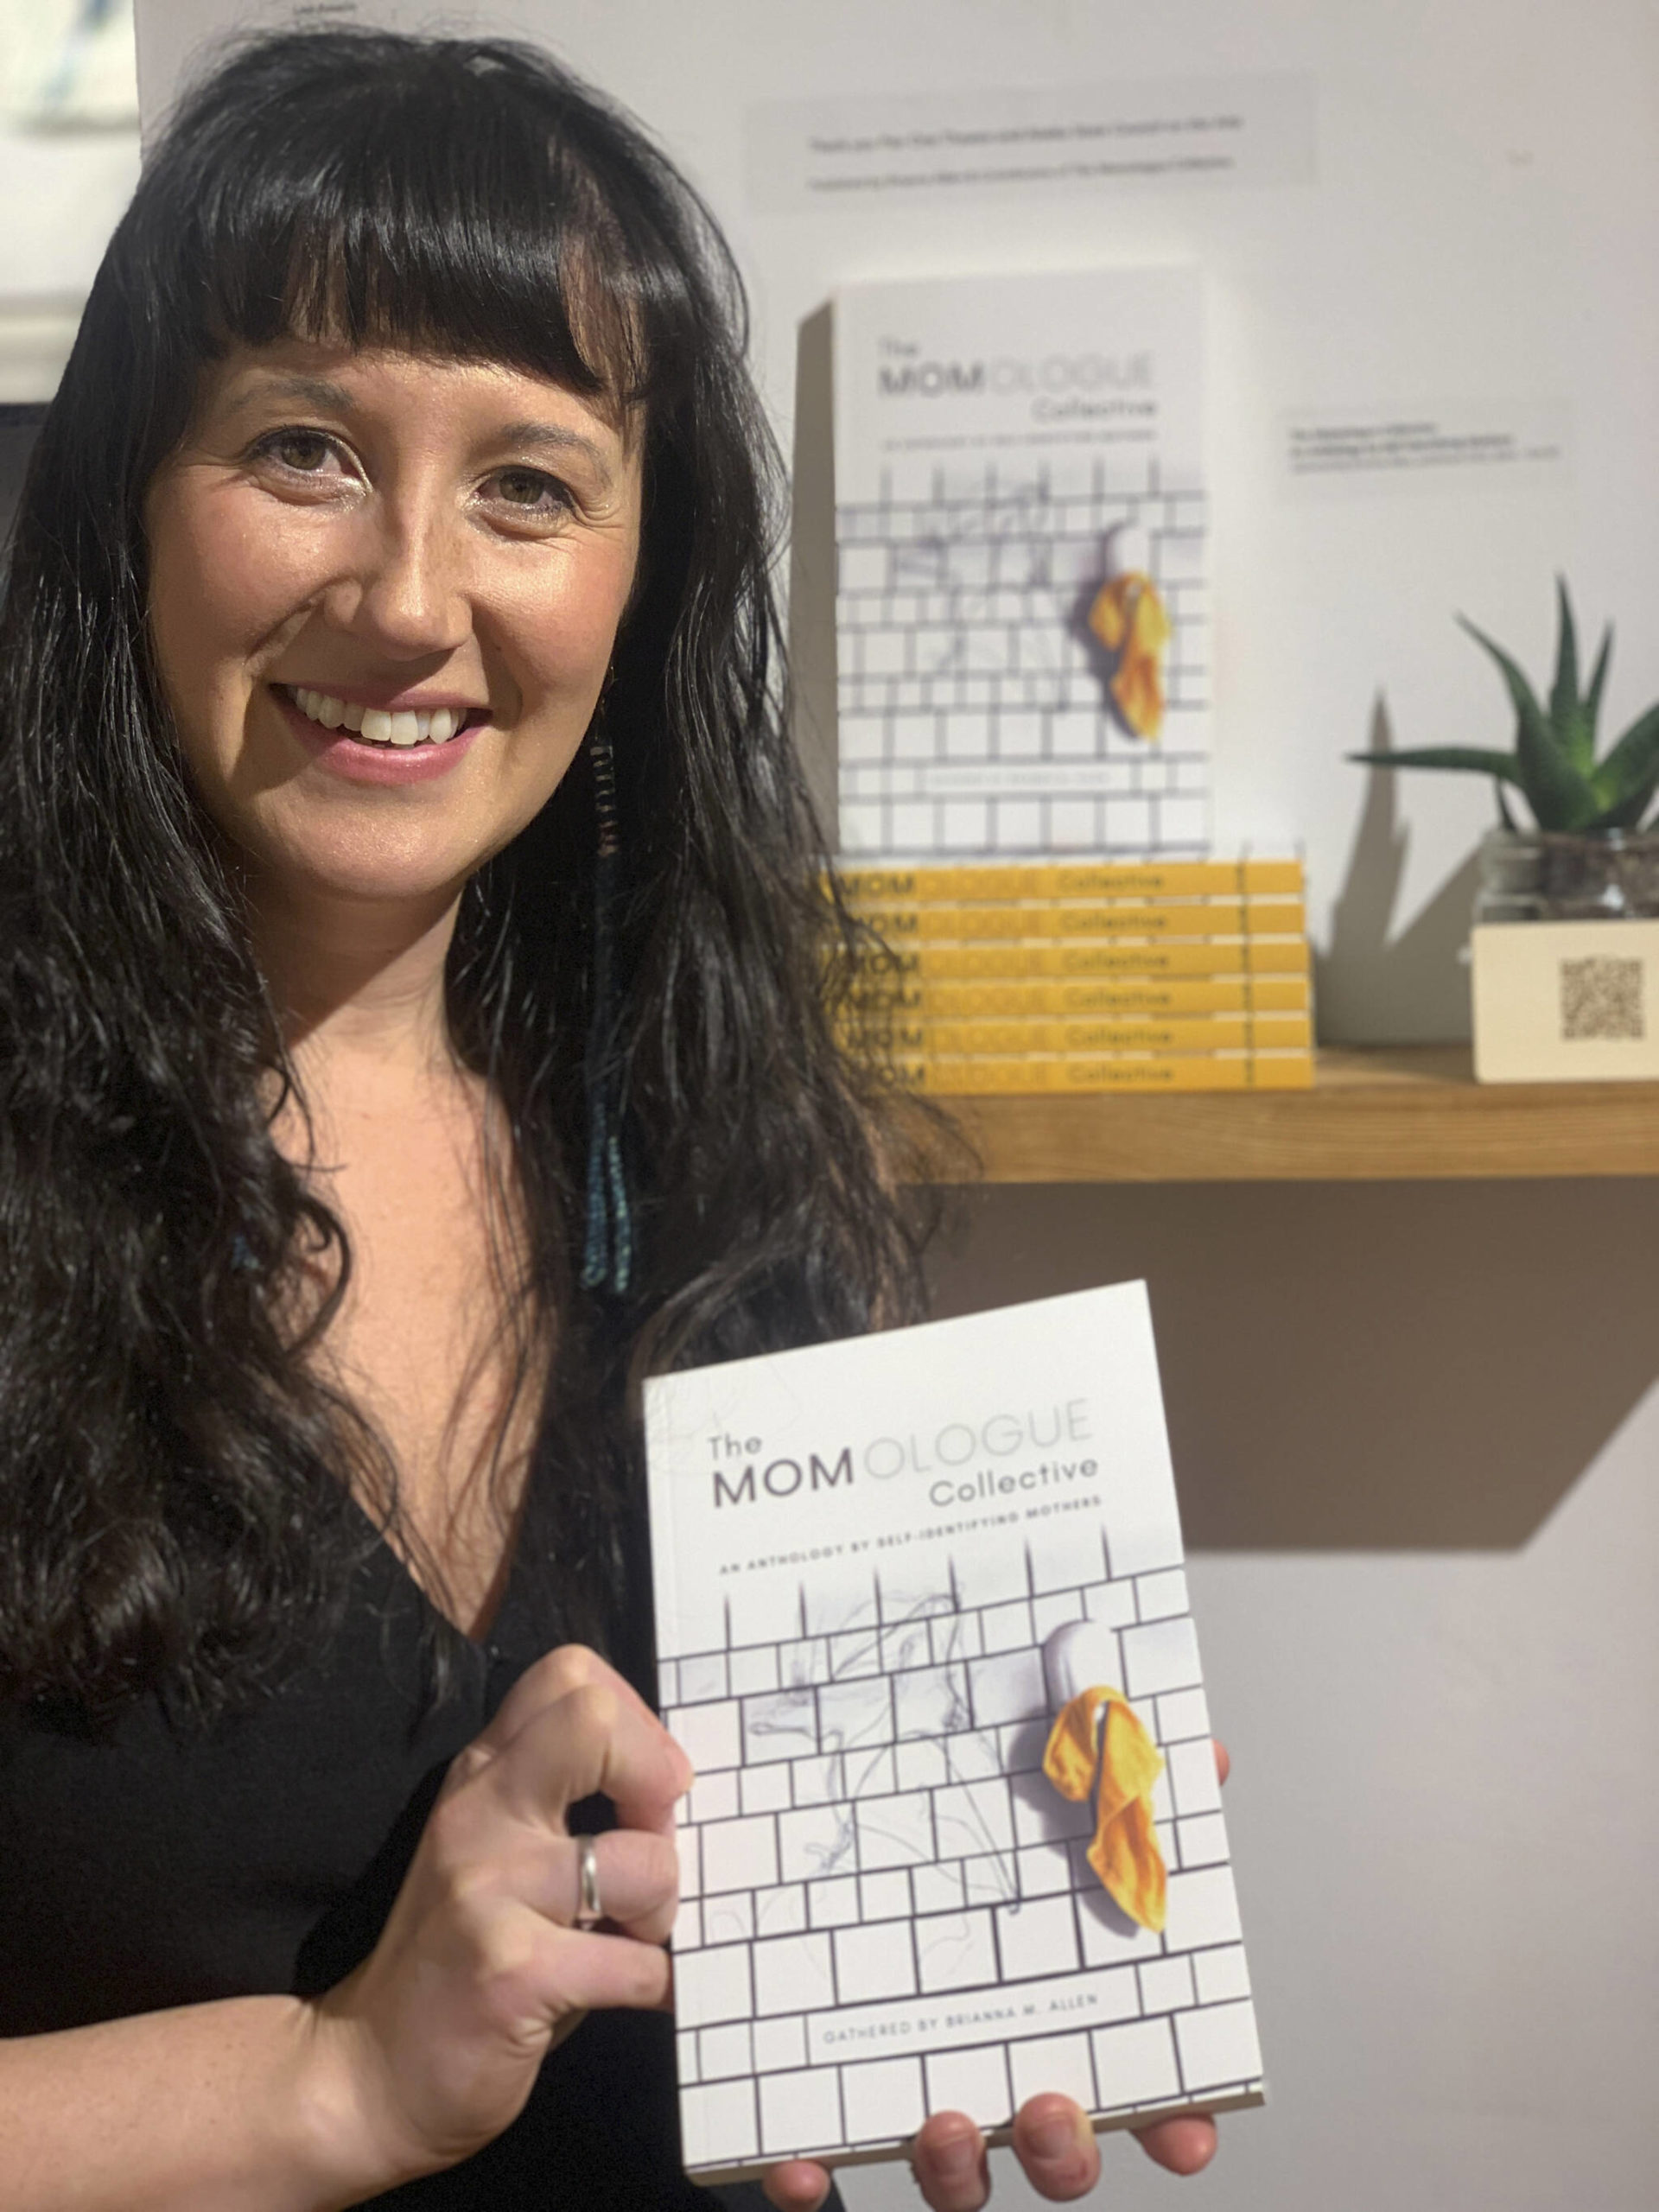 Brianna Allen poses with the book she edited, The MOMologues, at the opening of the Mother exhibit showing this month at Bunnell Street Arts Center. (Photo by Christina Whiting)